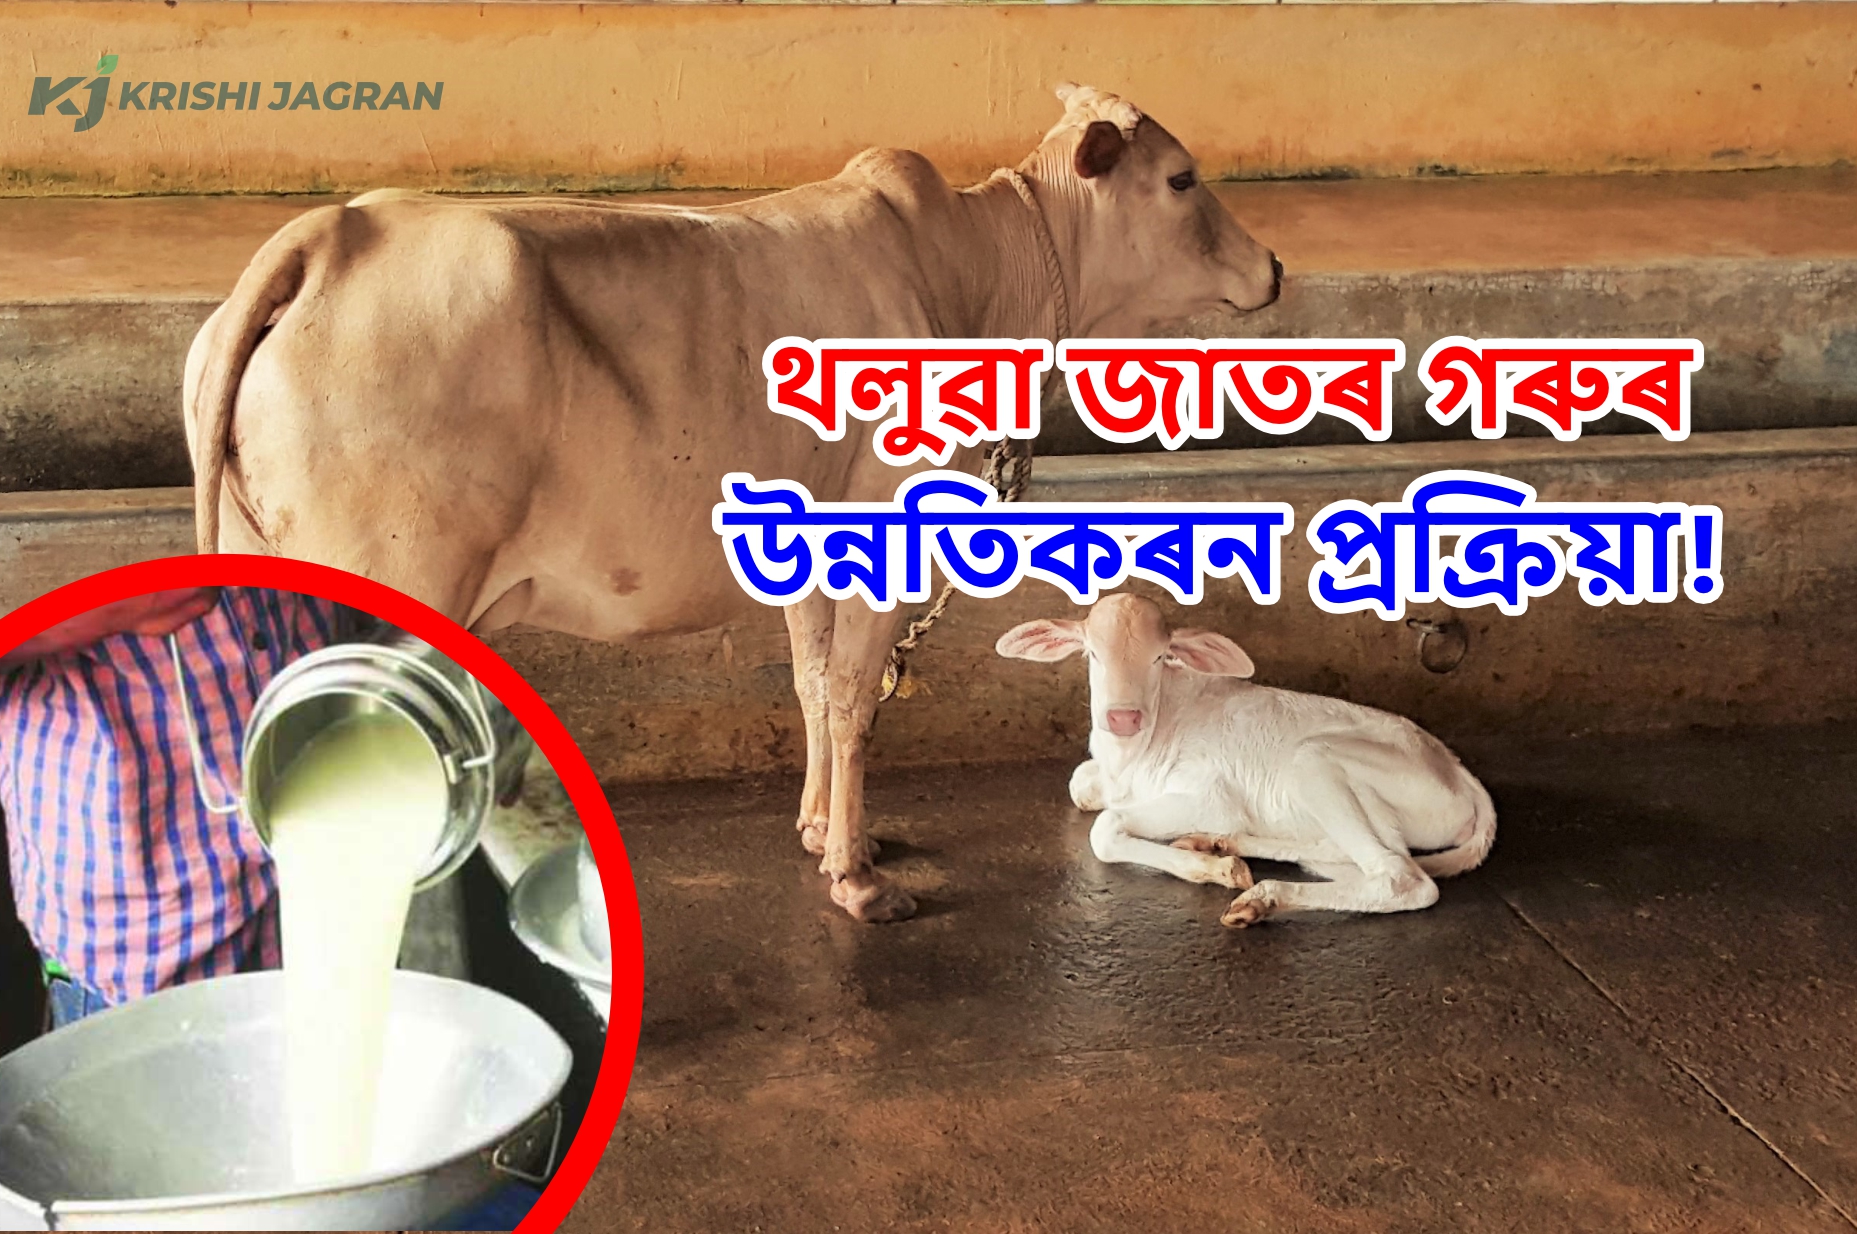 Improvement of indigenous breeds of cows for higher milk production